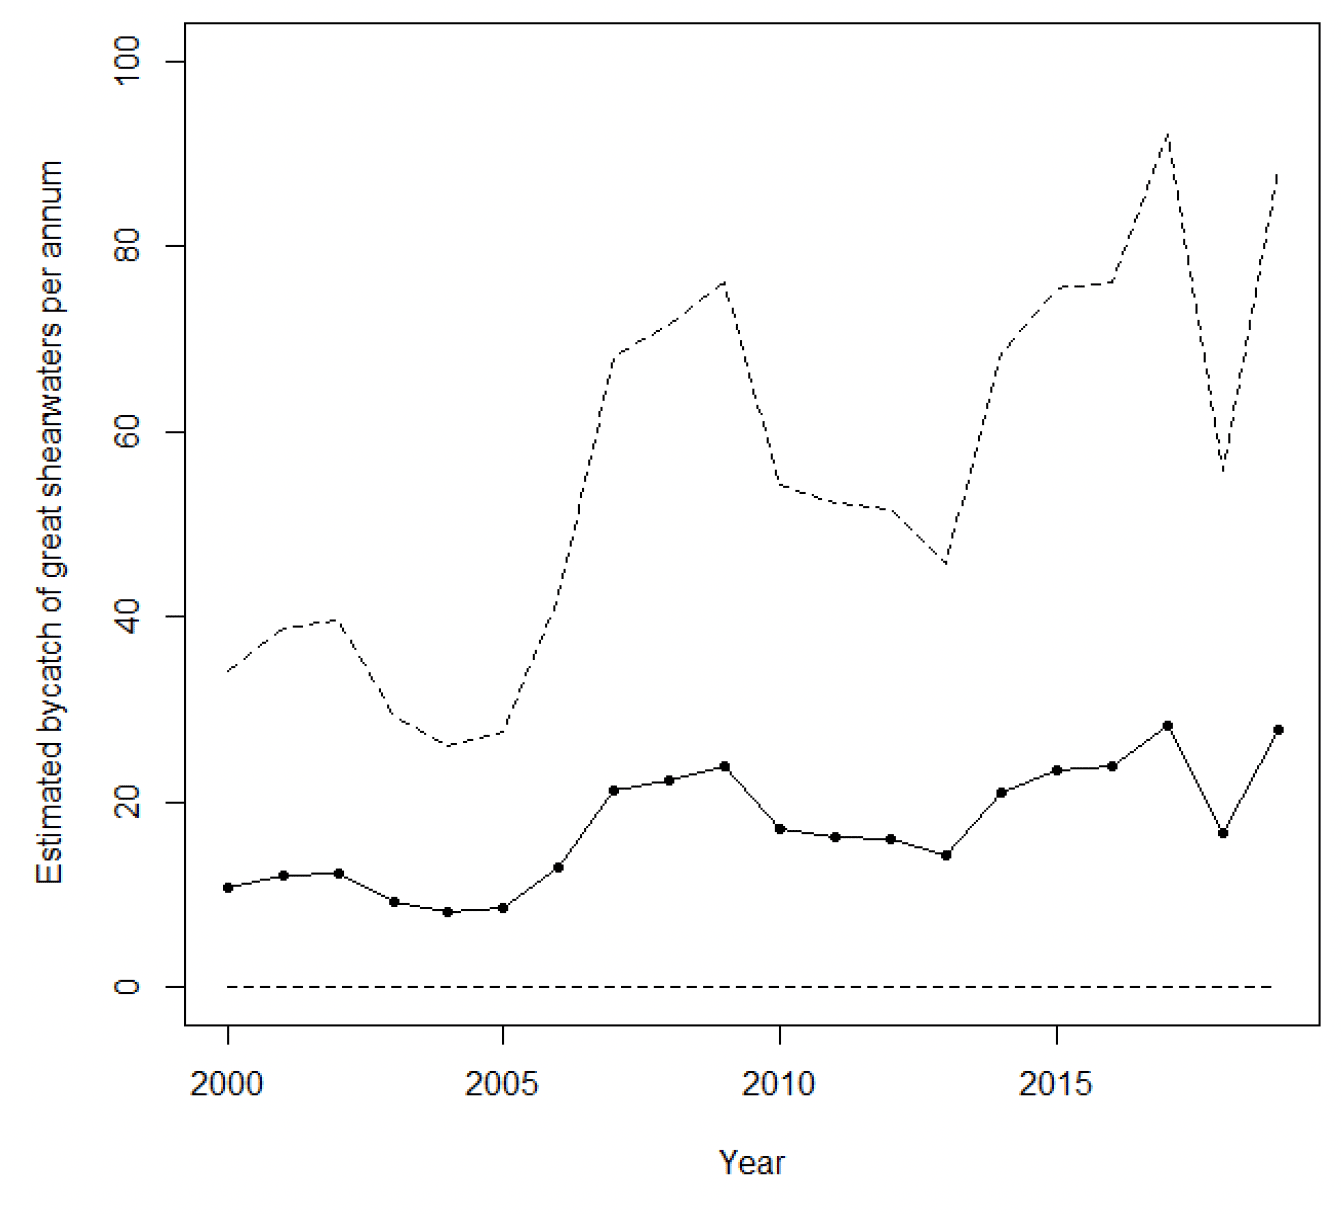 Bycatch of great shearwaters, with dashed lines representing upper and lower confidence limits. Trend line increased slightly from less than twenty in 2000 to just over twenty in later years.